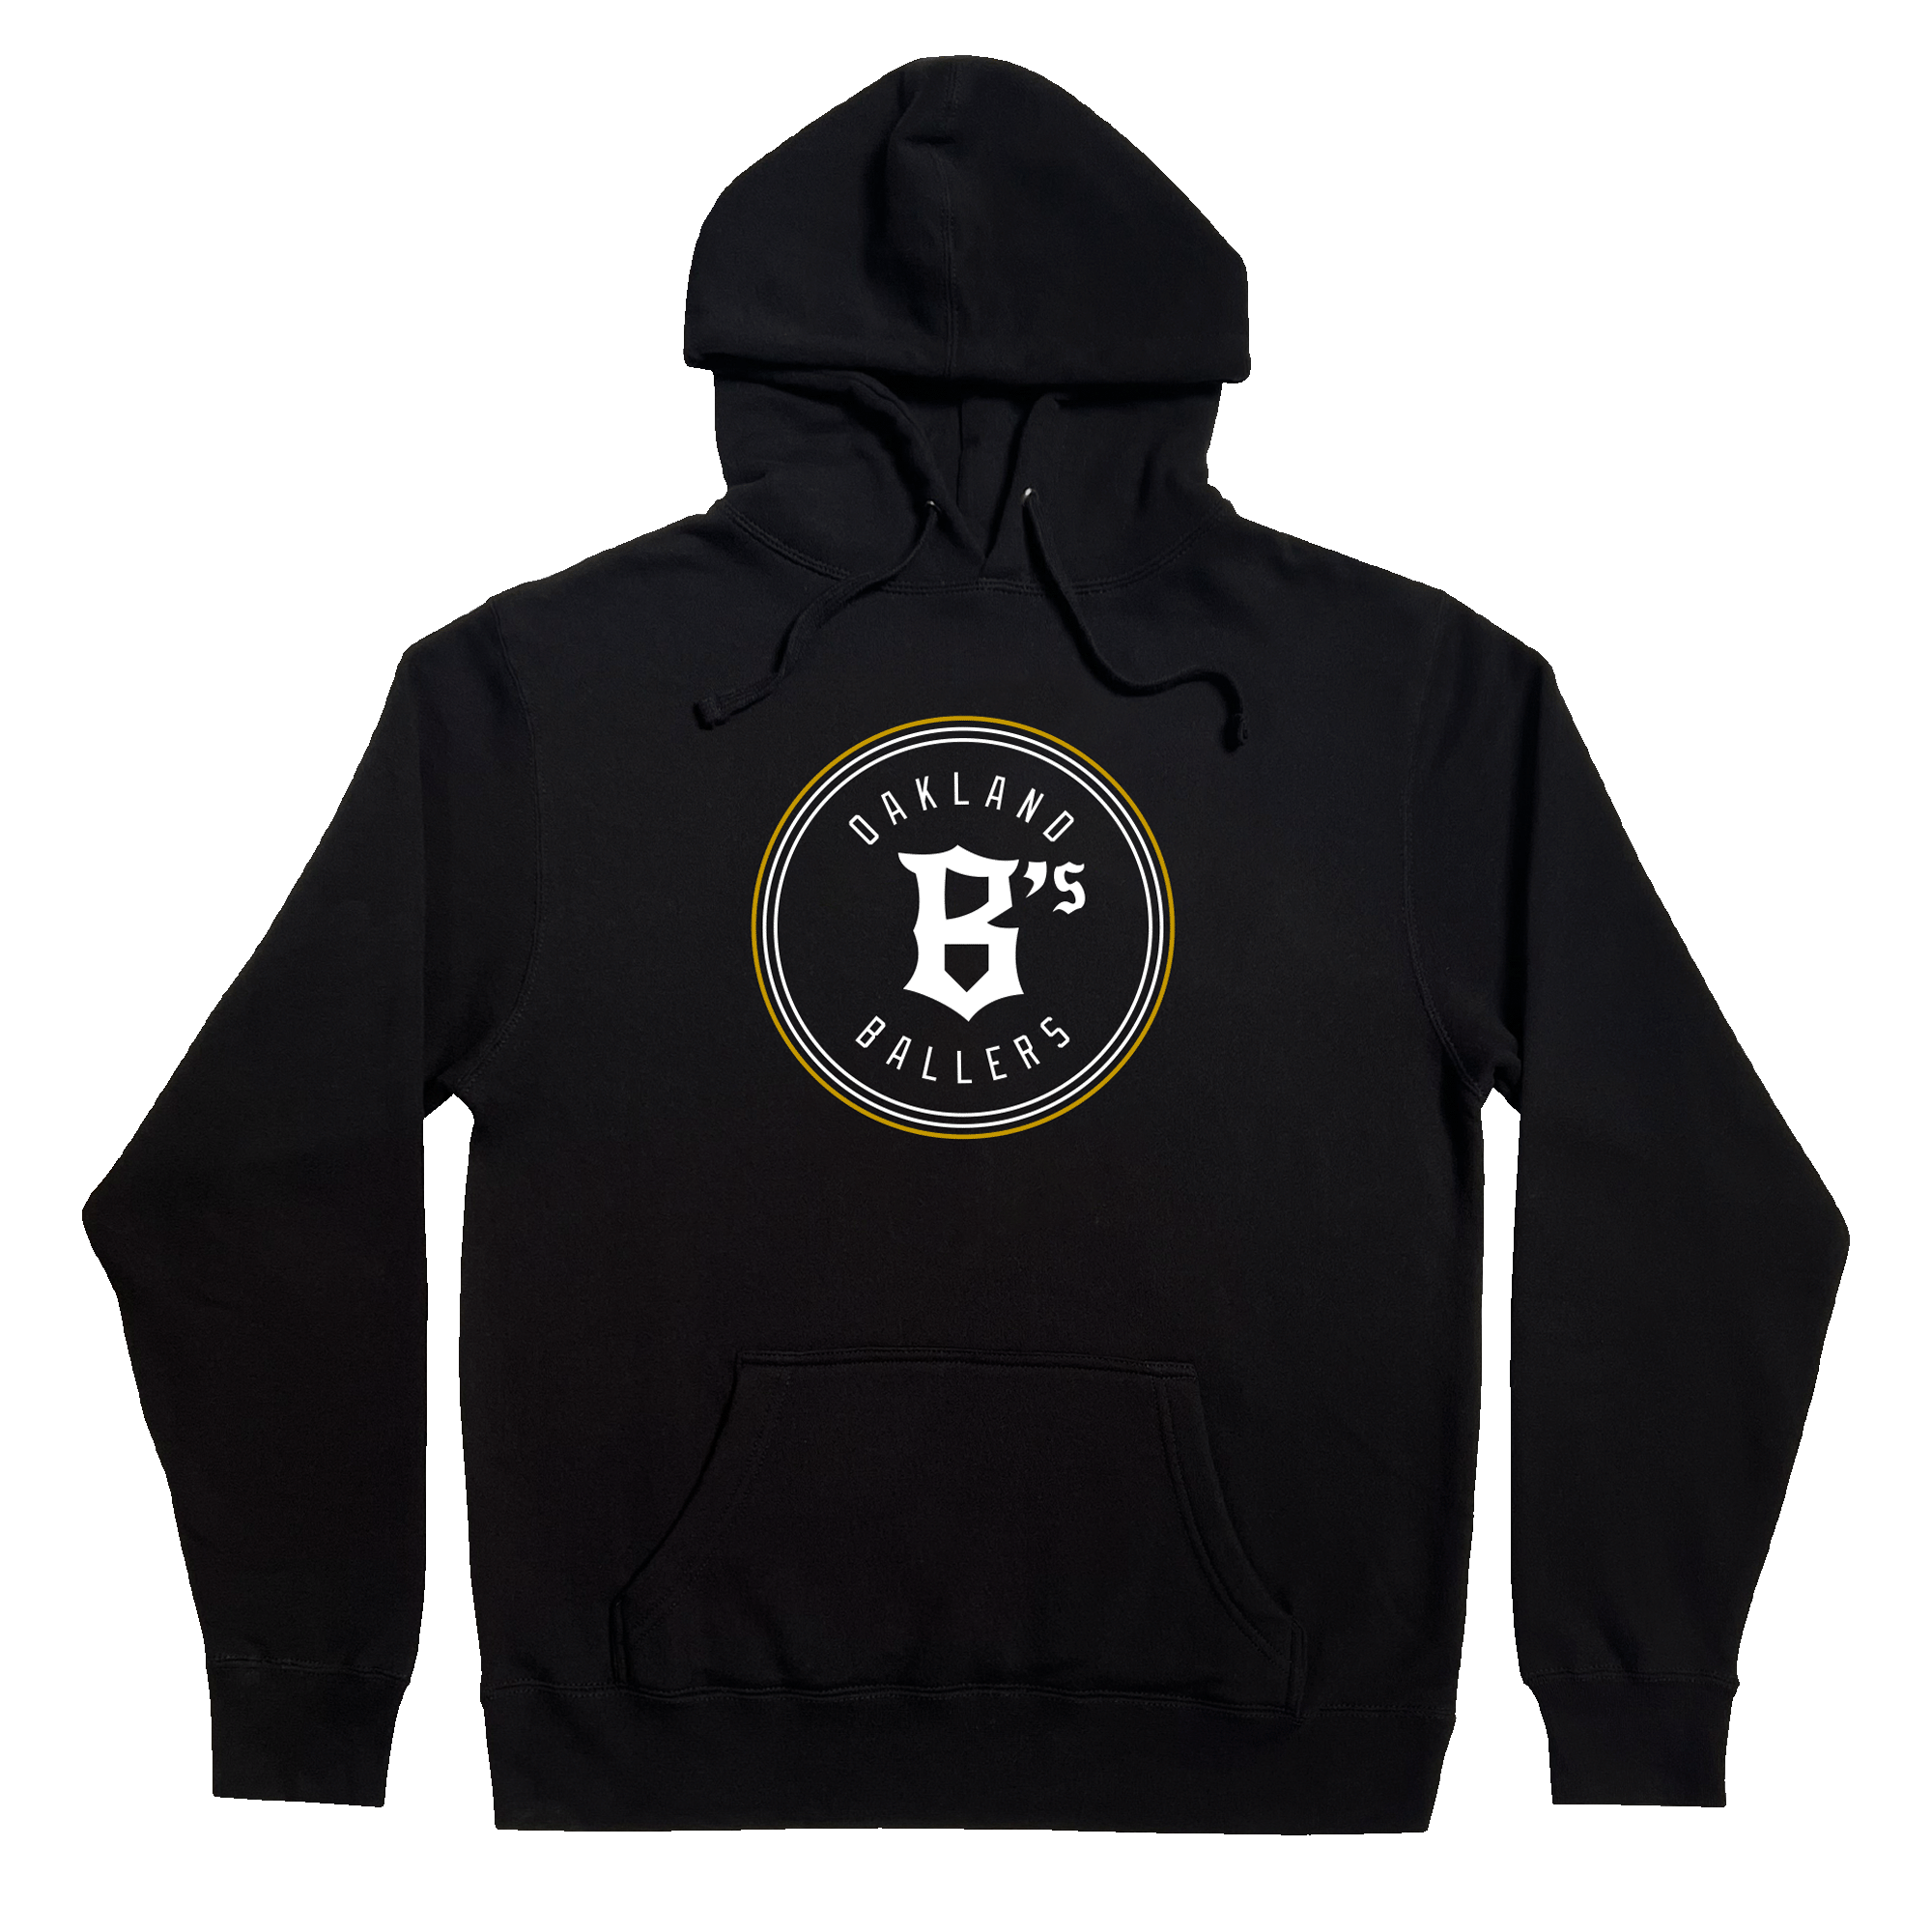 Front view of a black pullover hoodie sweatshirt with round white and gold Oakland Ballers logo and wordmark on the front chest.